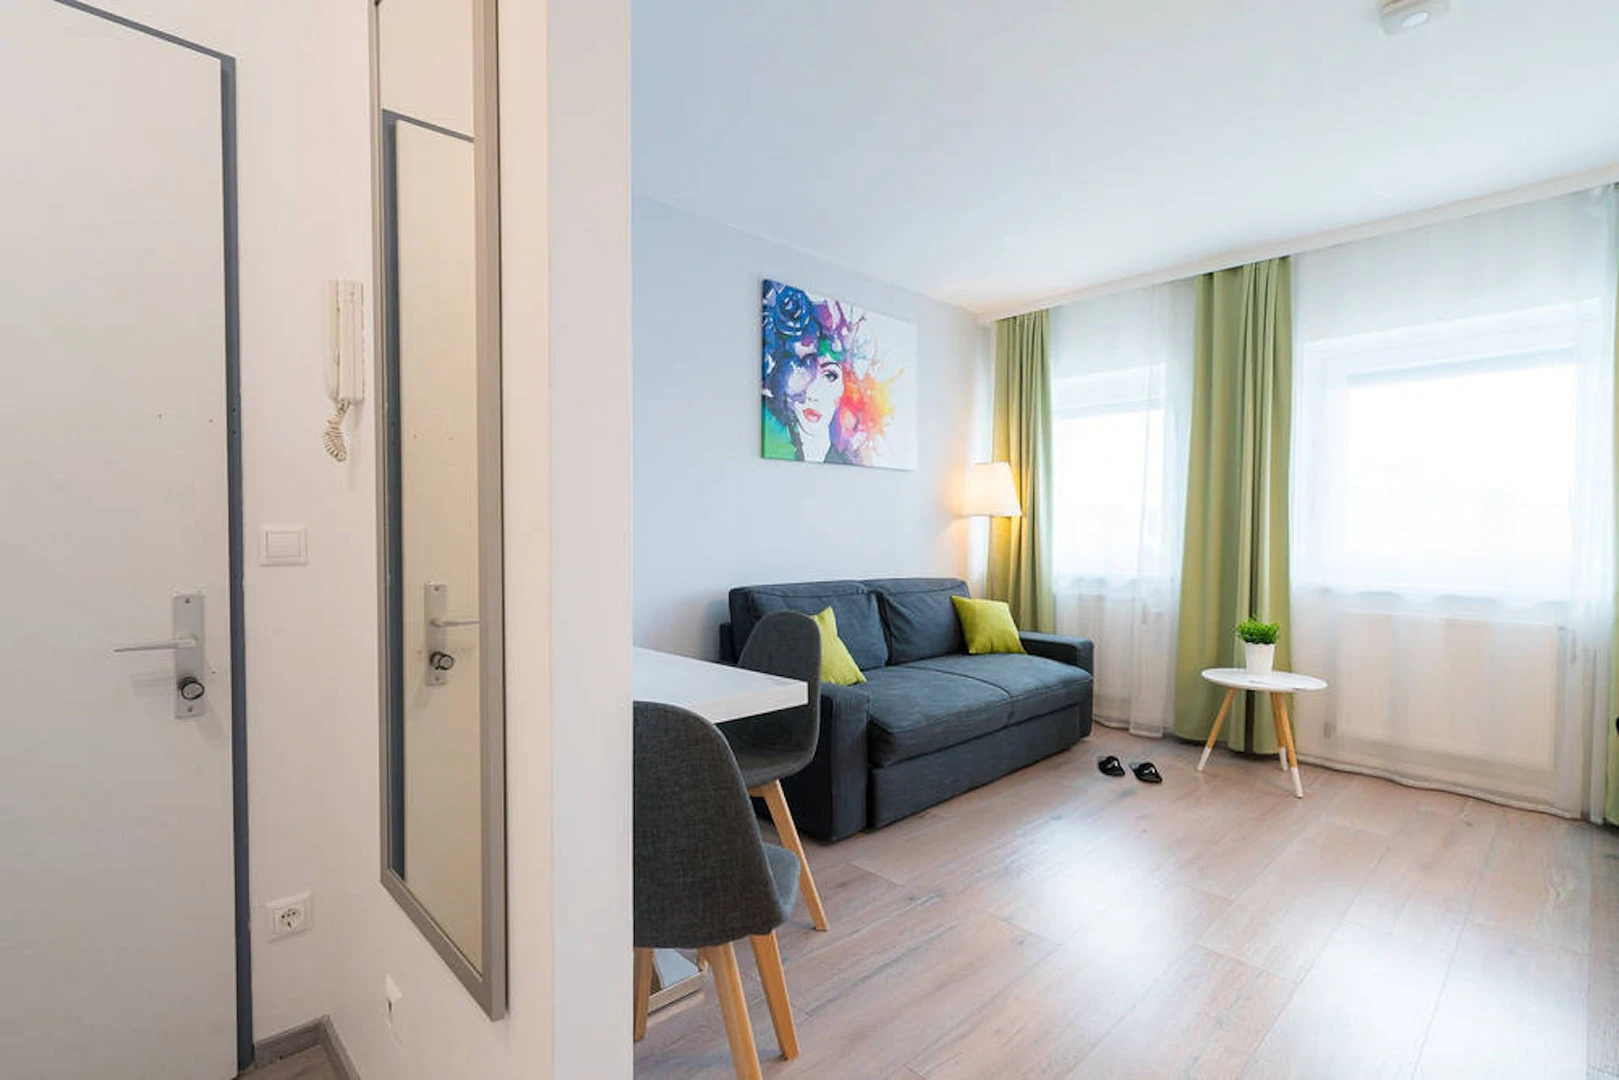 Accommodation in the centre of Vienna